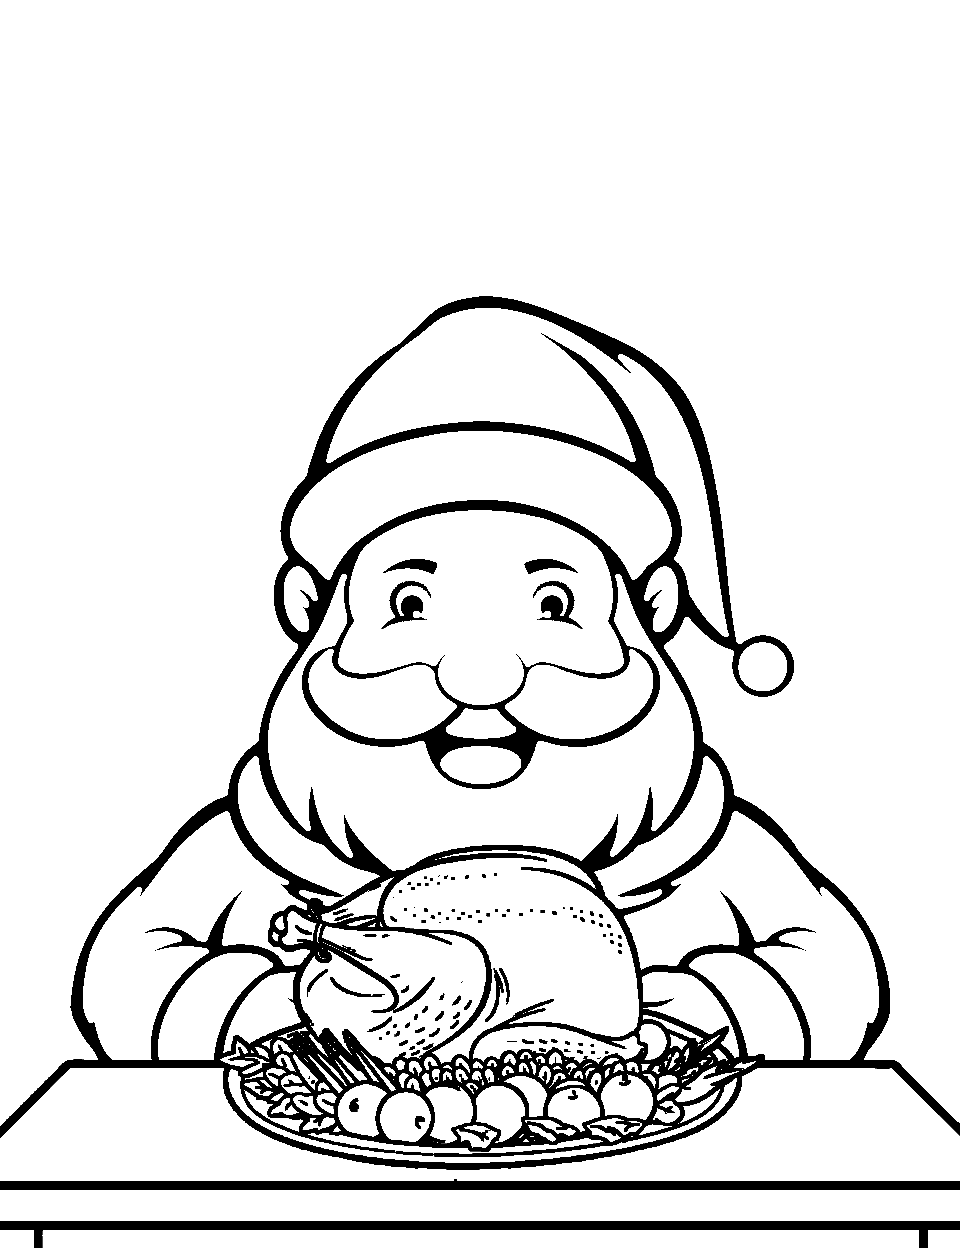 Holiday Feast with Santa Coloring Page - Santa enjoying a festive feast of turkey and potatoes.